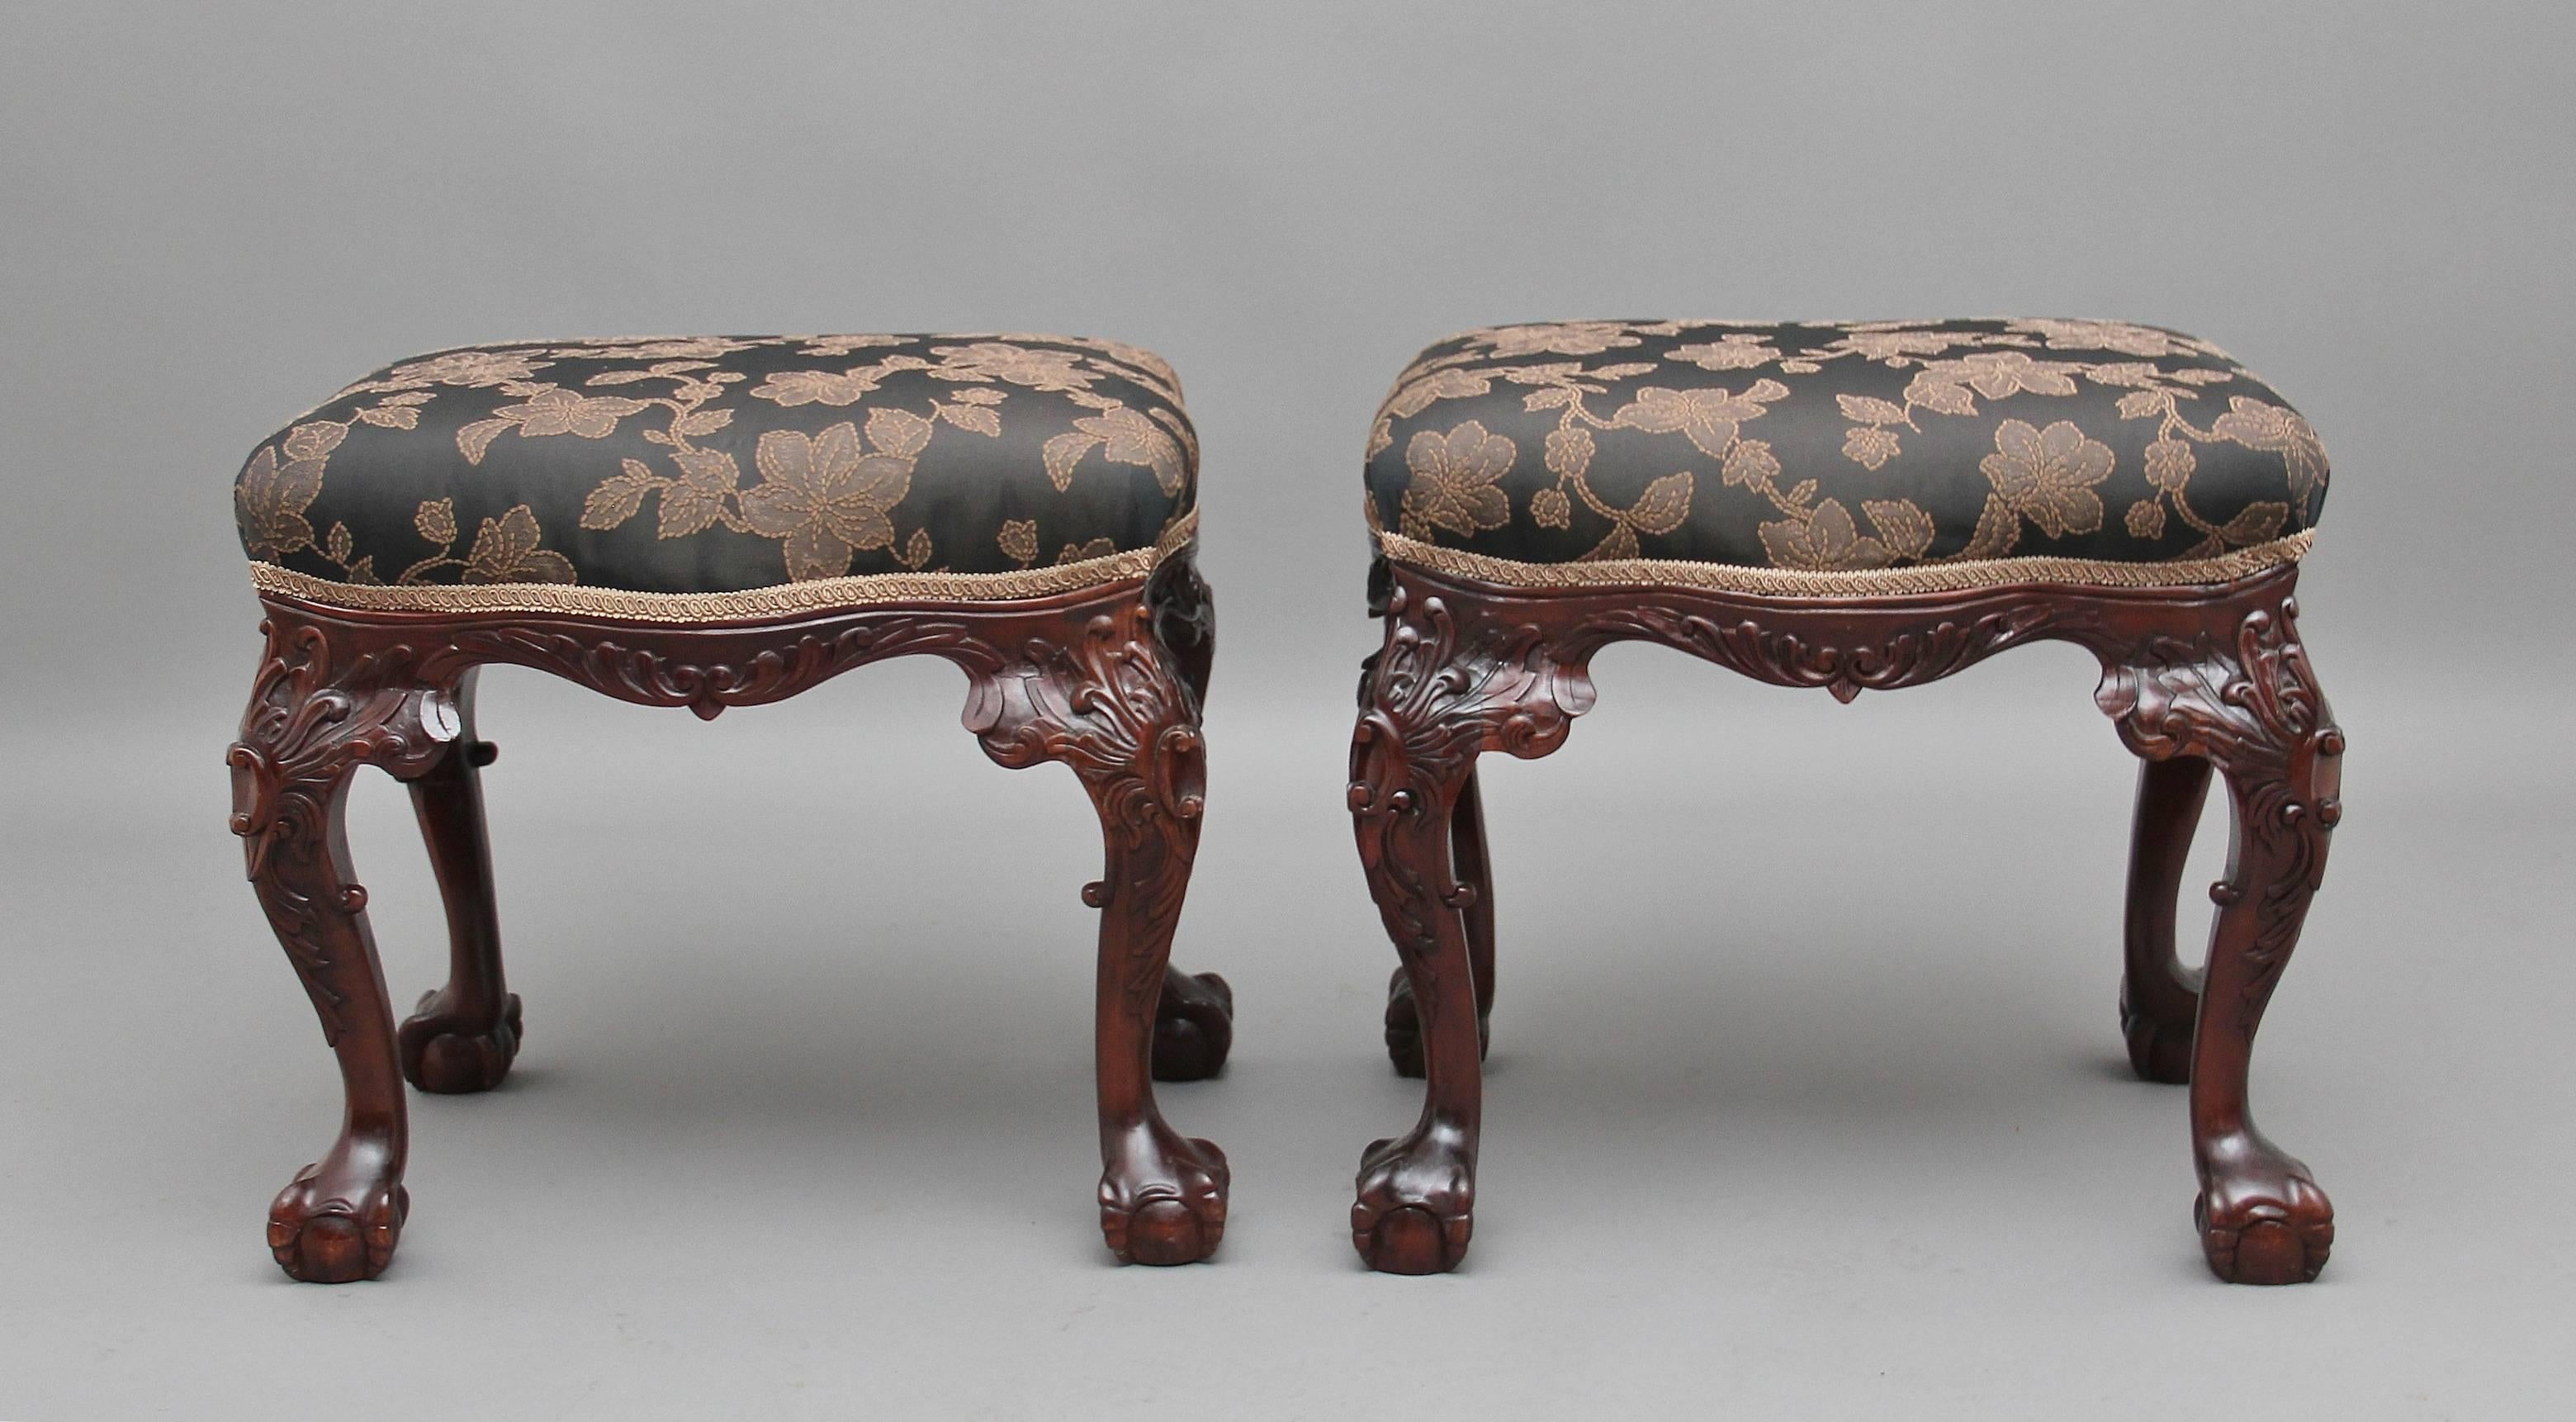 A decorative pair of mid-20th century mahogany stools, each of serpentine outline, upholstered in a dark colored fabric with a floral pattern, supported on foliate carved cabriole legs terminating in claw and ball feet, circa 1950. Measures: Height